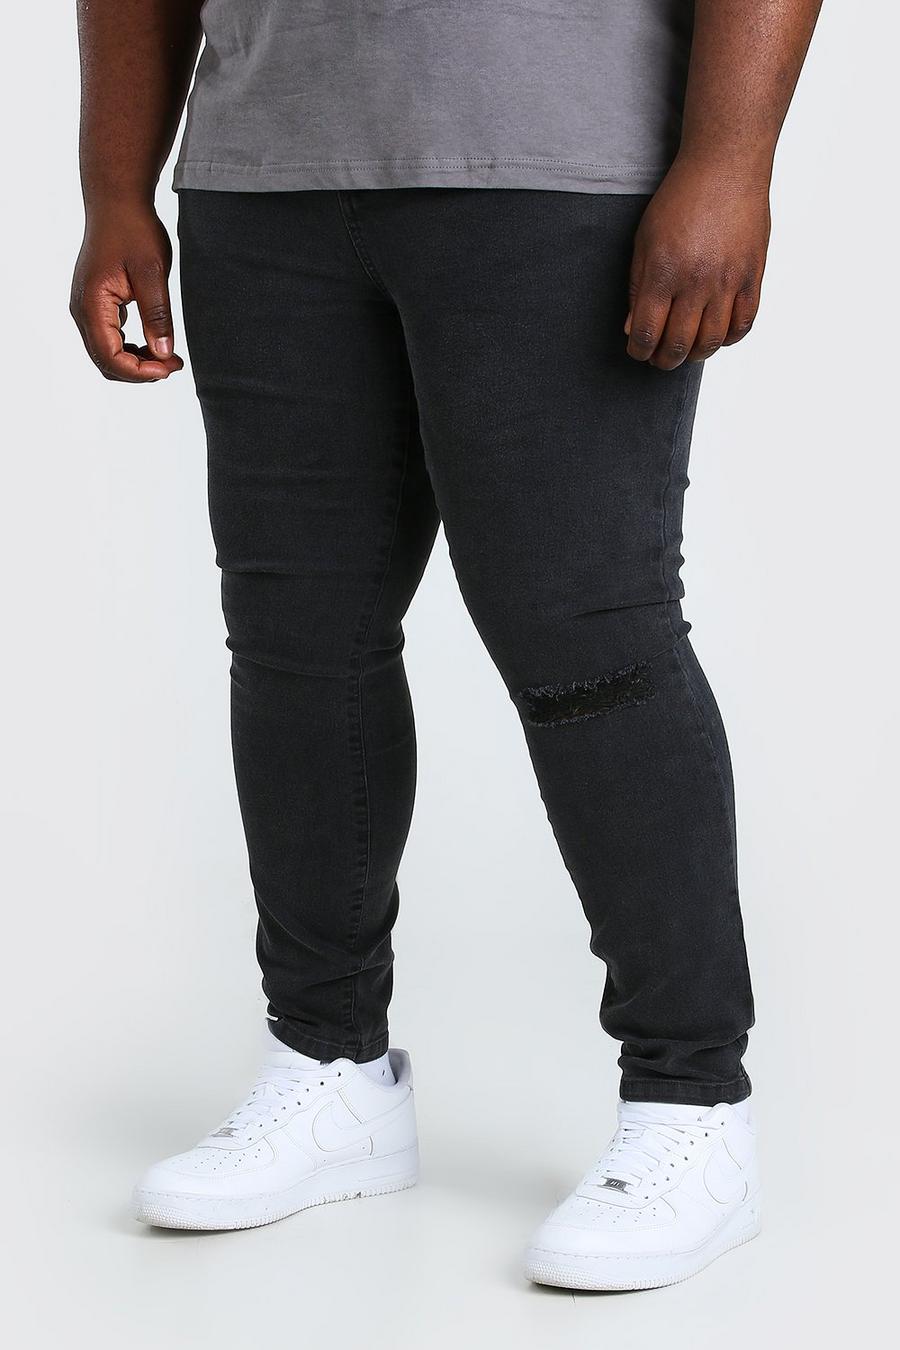 Charcoal grå Plus Size Busted Knee Super Skinny Jean